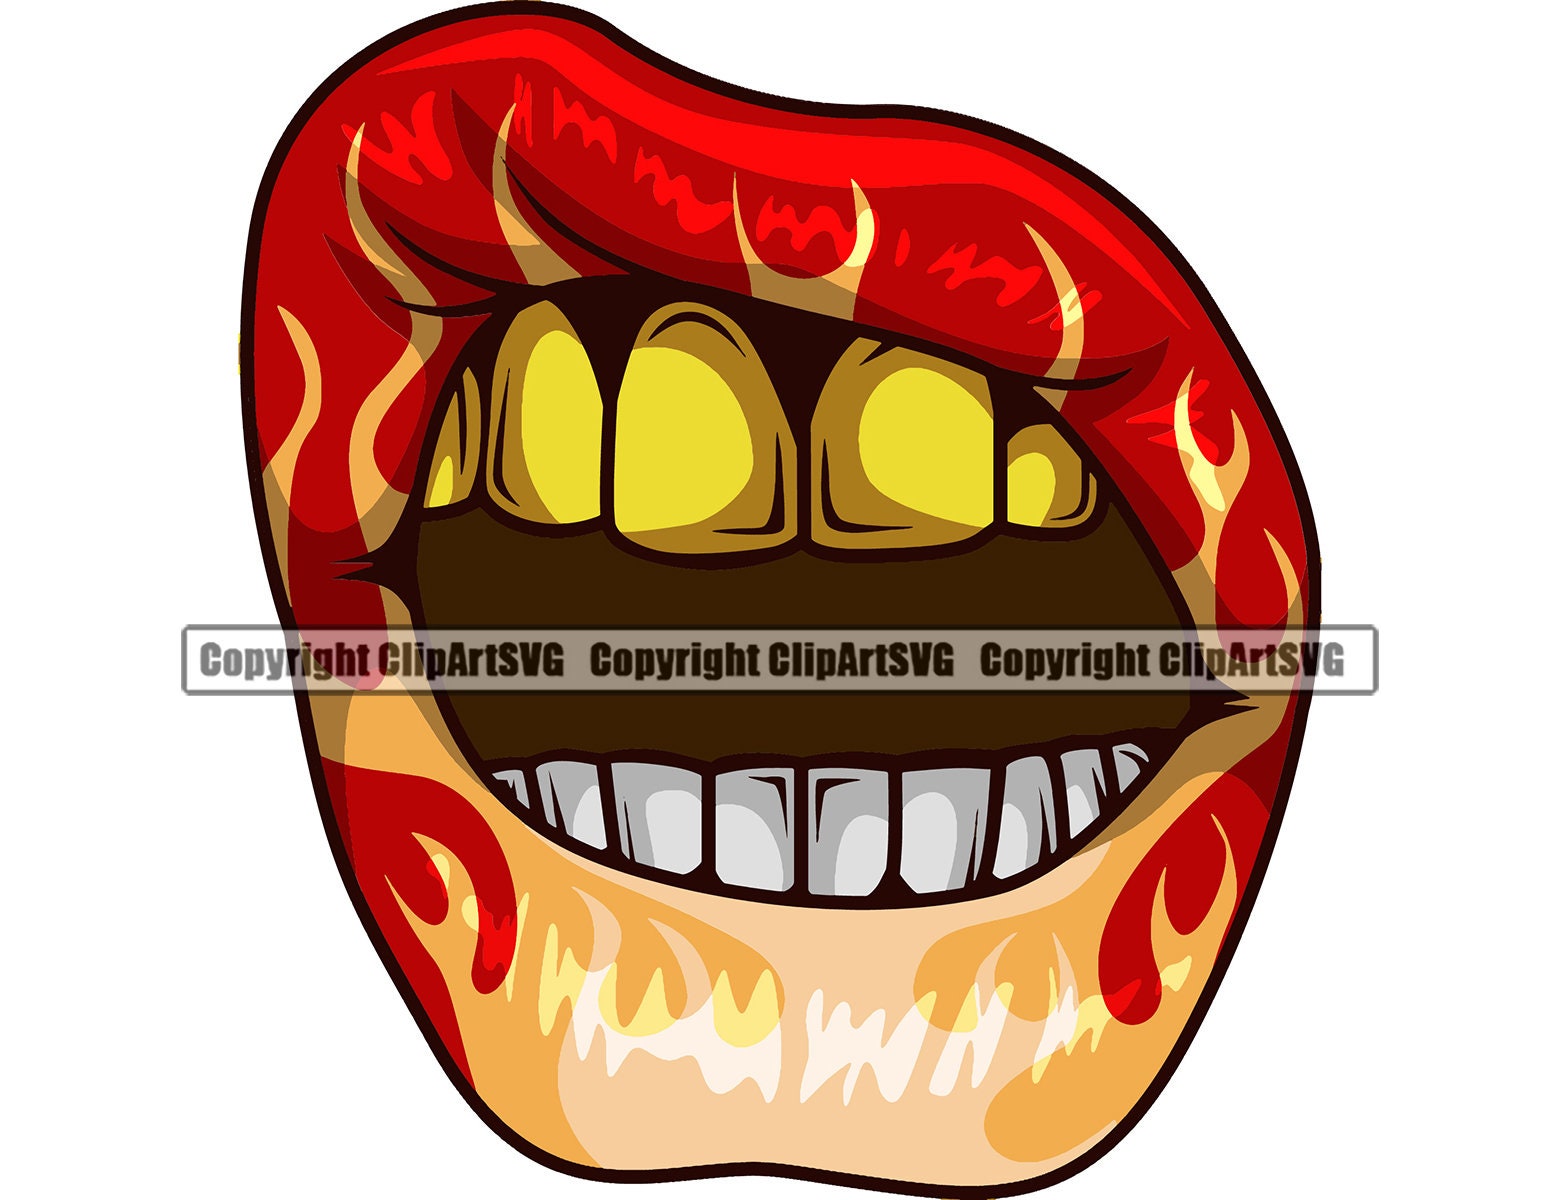 Female Gold Teeth Grill SVG Design Savage Woman Hip Hop Rap Lady Rapper Tattoo Gangster Girl Grillz Angry Mad Face Head SVG Cut File Jpg PNG